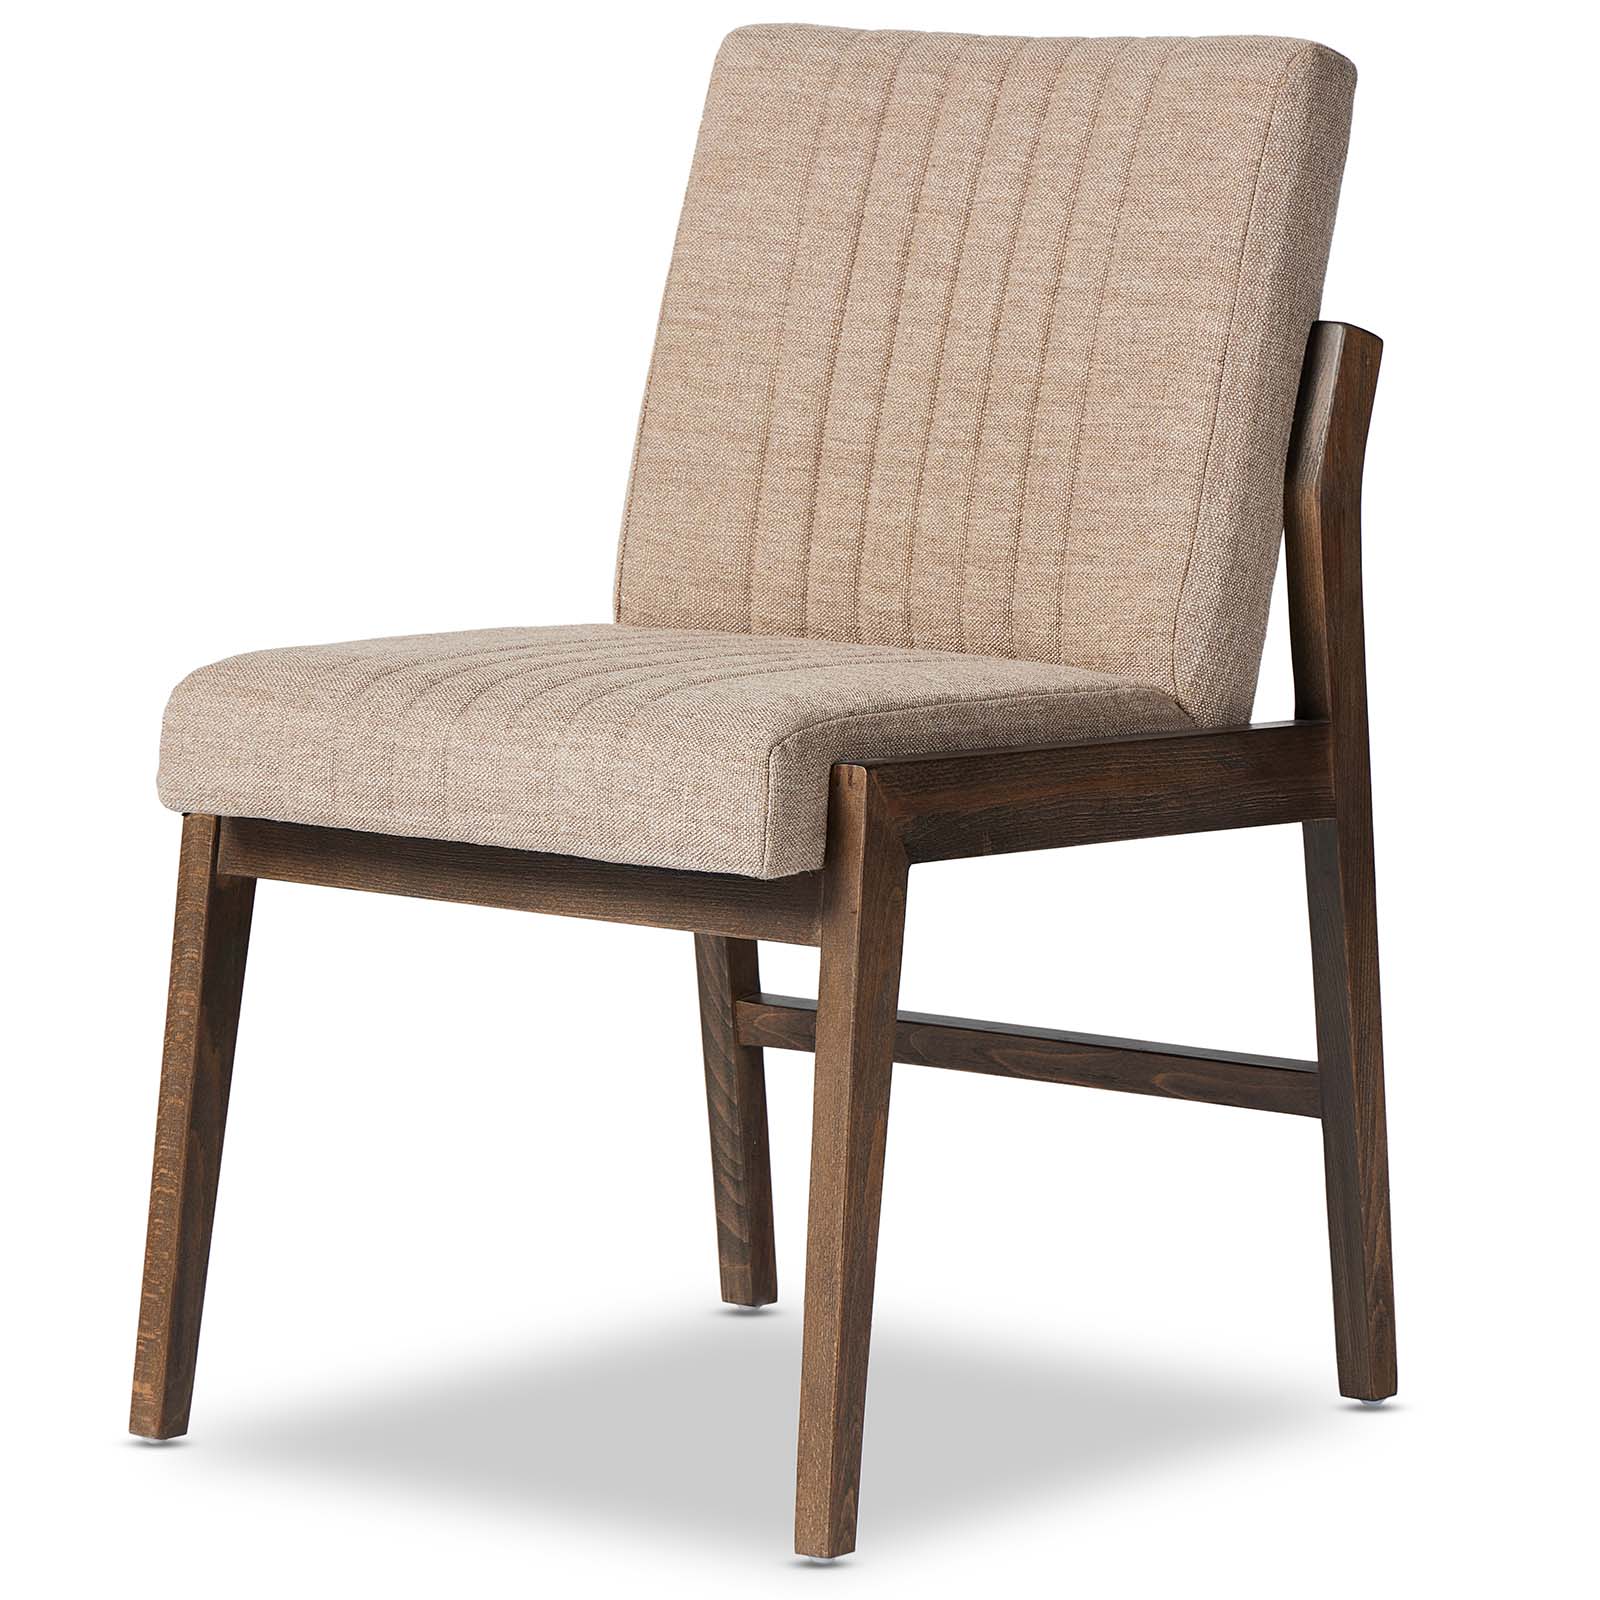 Allie Dining Chair